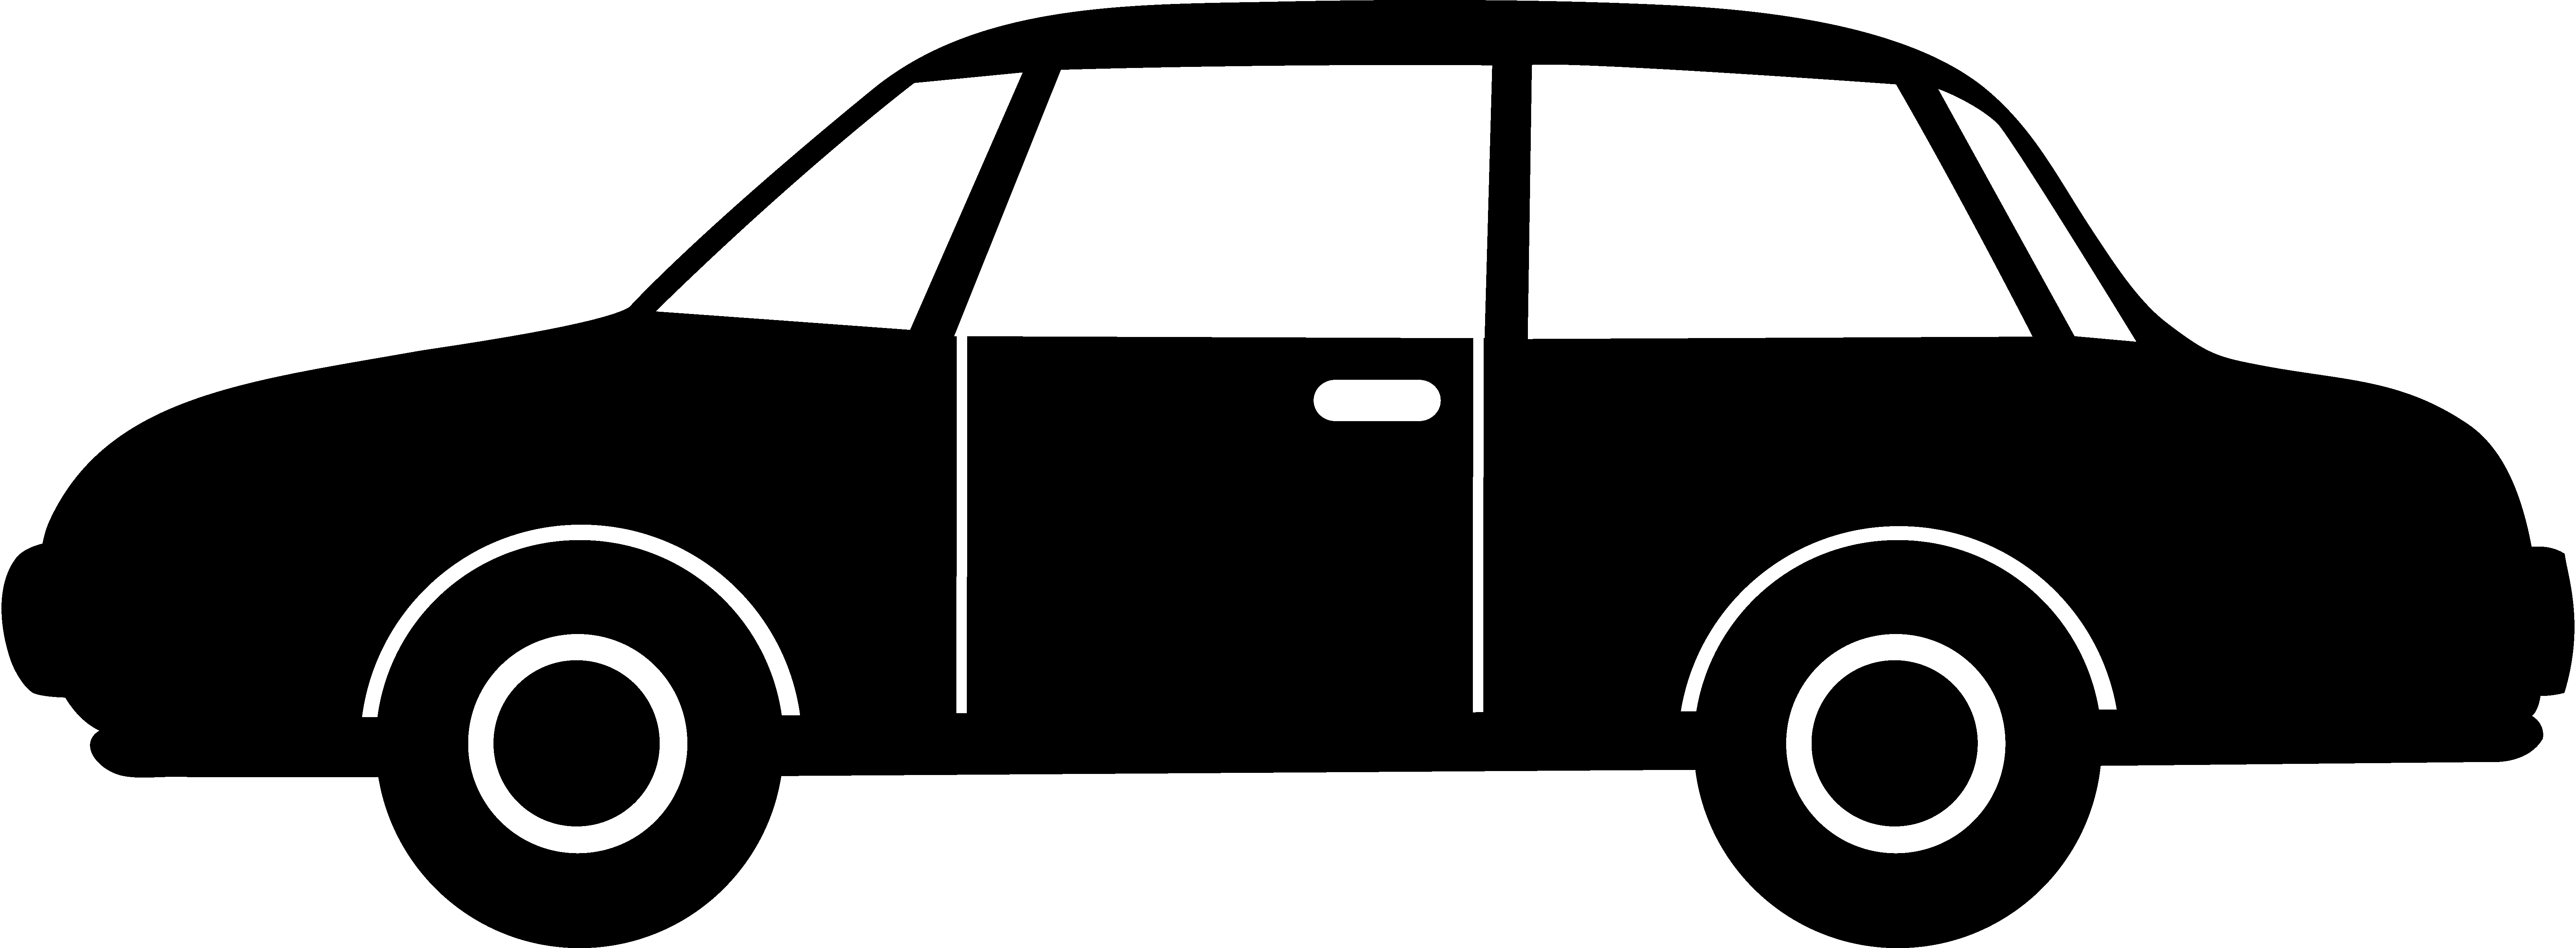 free car clipart black and white - photo #28